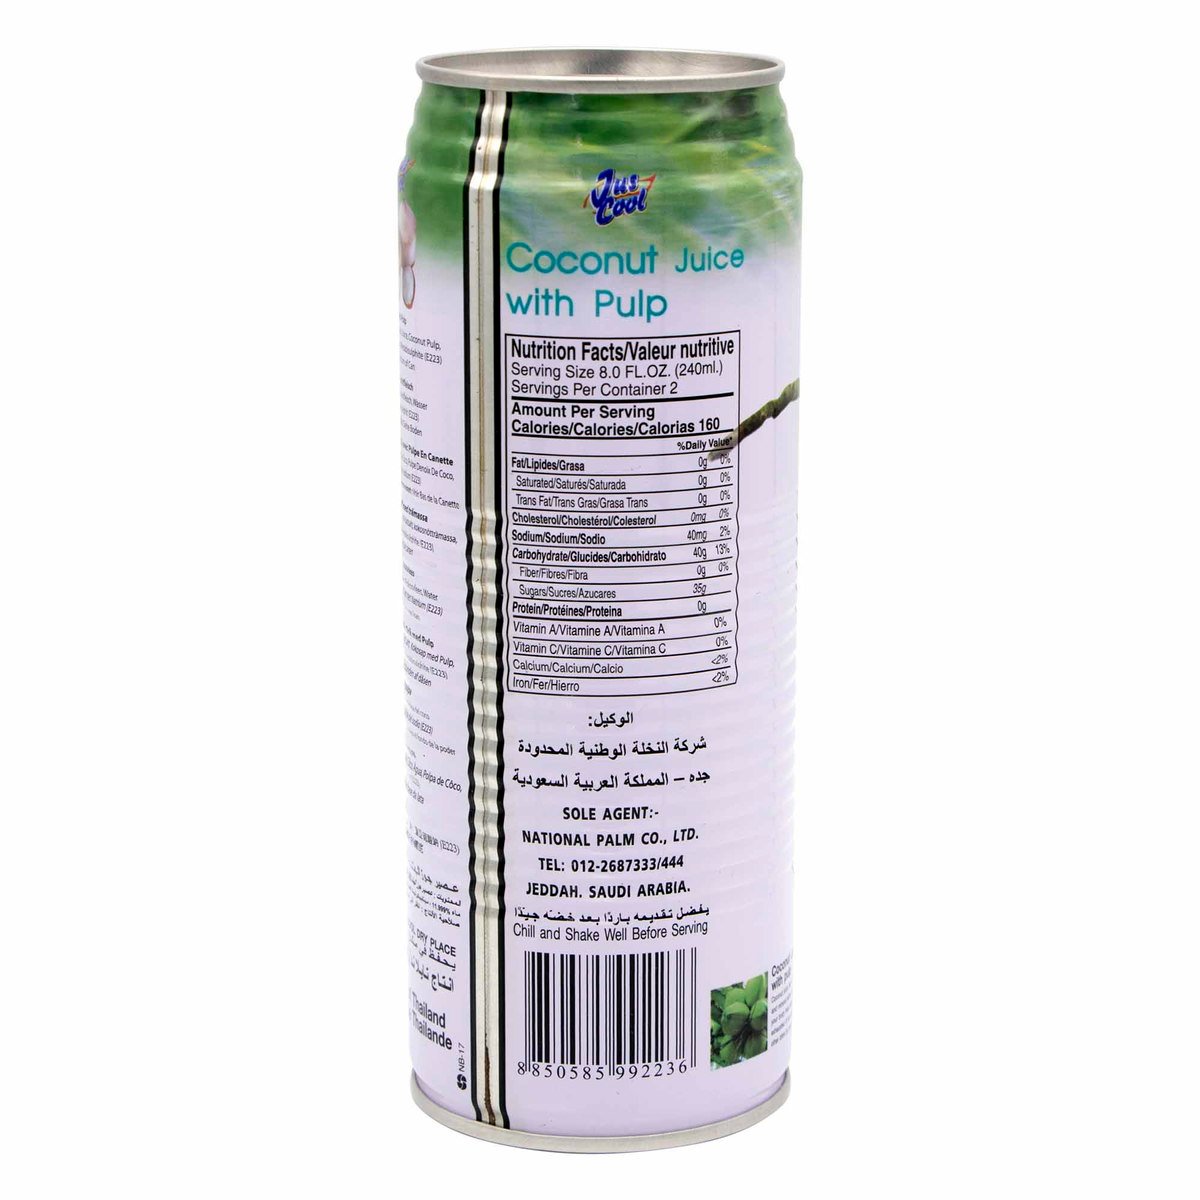 Jus Cool Coconut Juice With Pulp 520ml